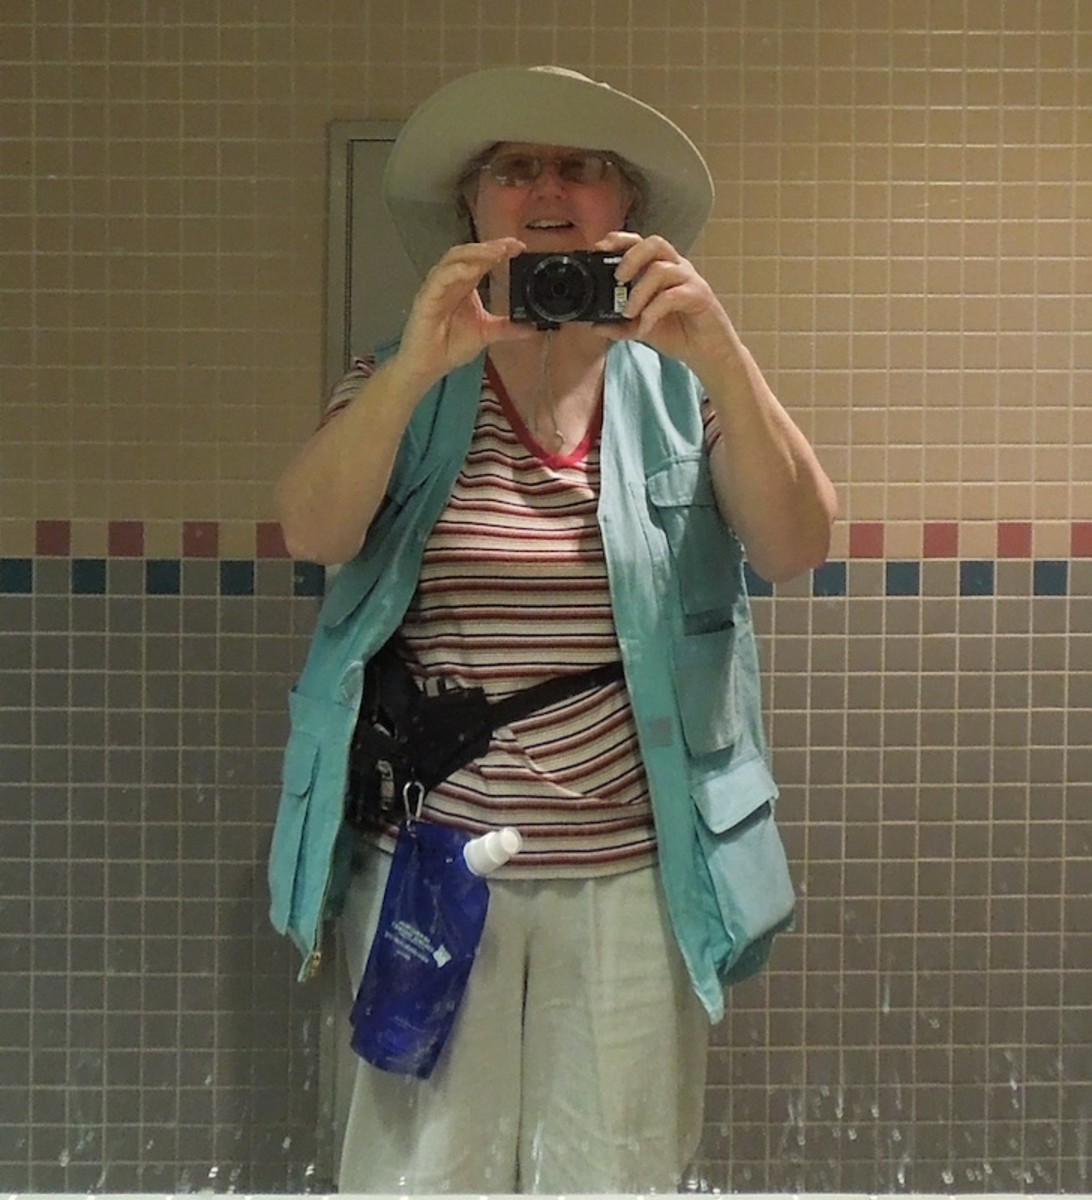 Not exactly high fashion, but it held all four cameras, my ID, my water, and all the brochures and business cards I collected. Sometimes function beats fashion.